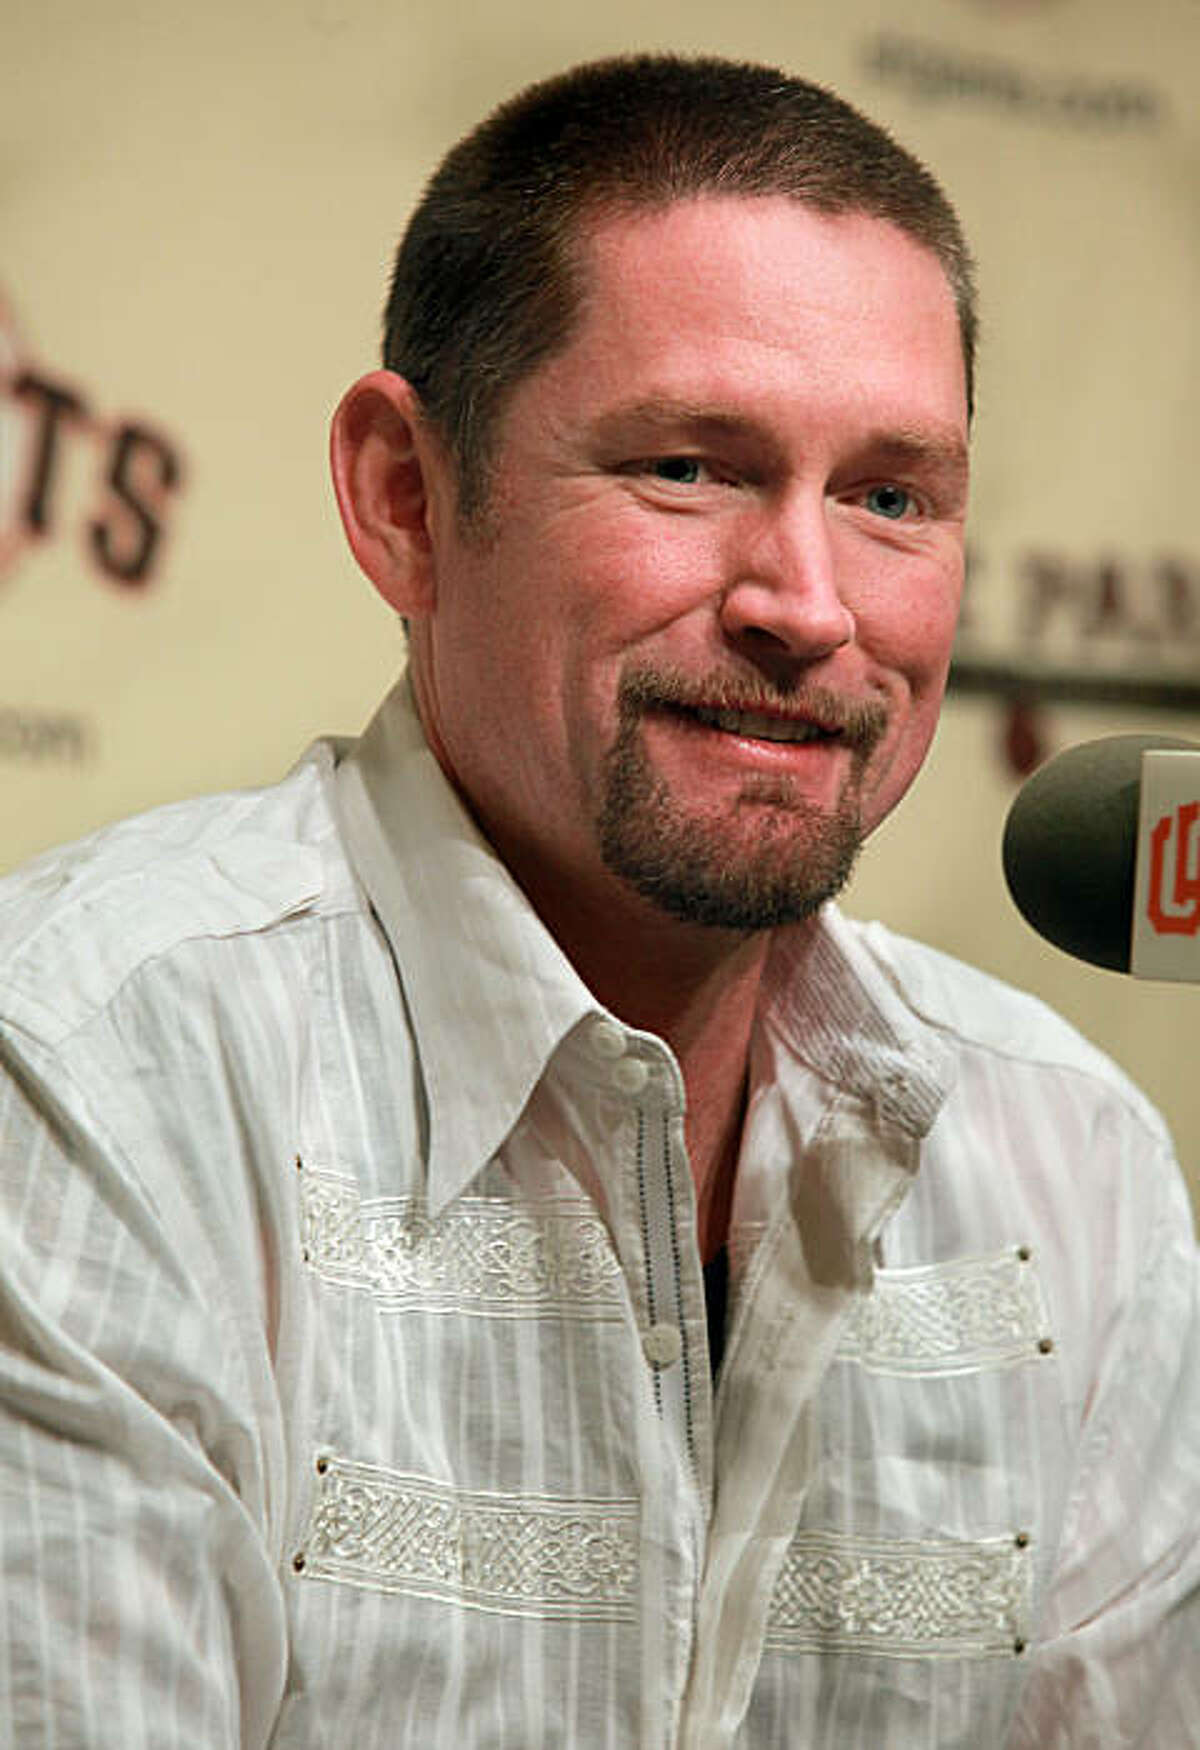 Aubrey Huff talks about signing his new contract with the San Francisco Giants at a press conference at AT&T Park in San Francisco, Calif., on Monday, November 23, 2010.